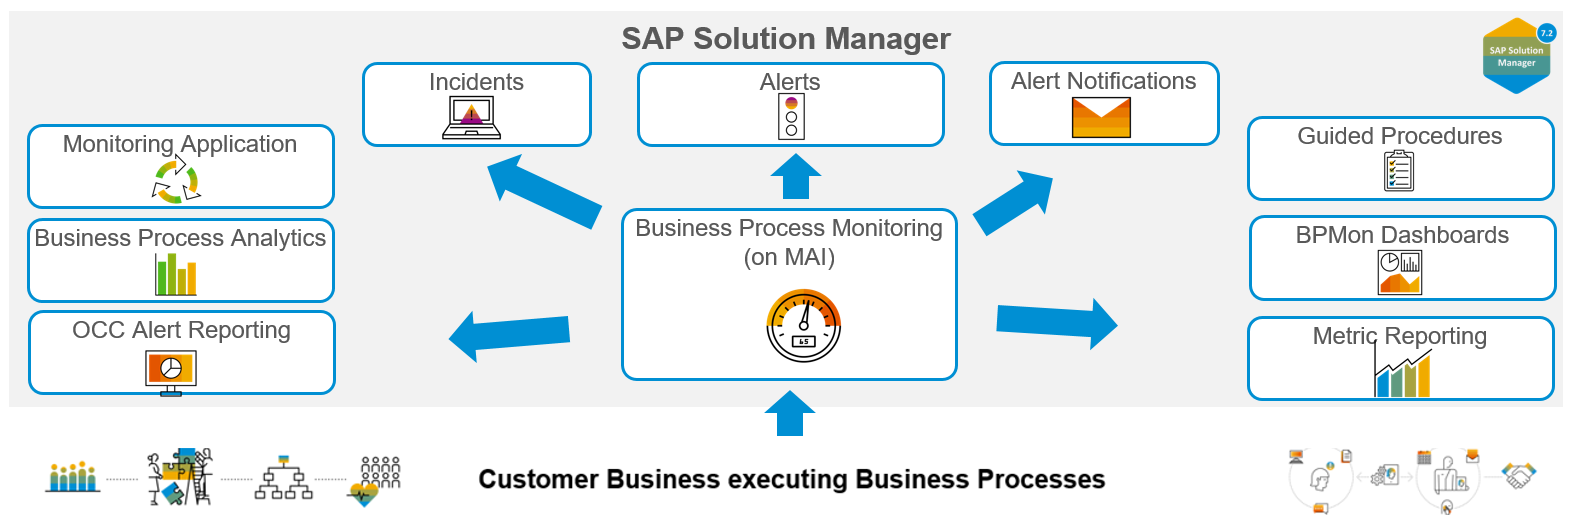 SAP Solution Manager Business Process Monitoring